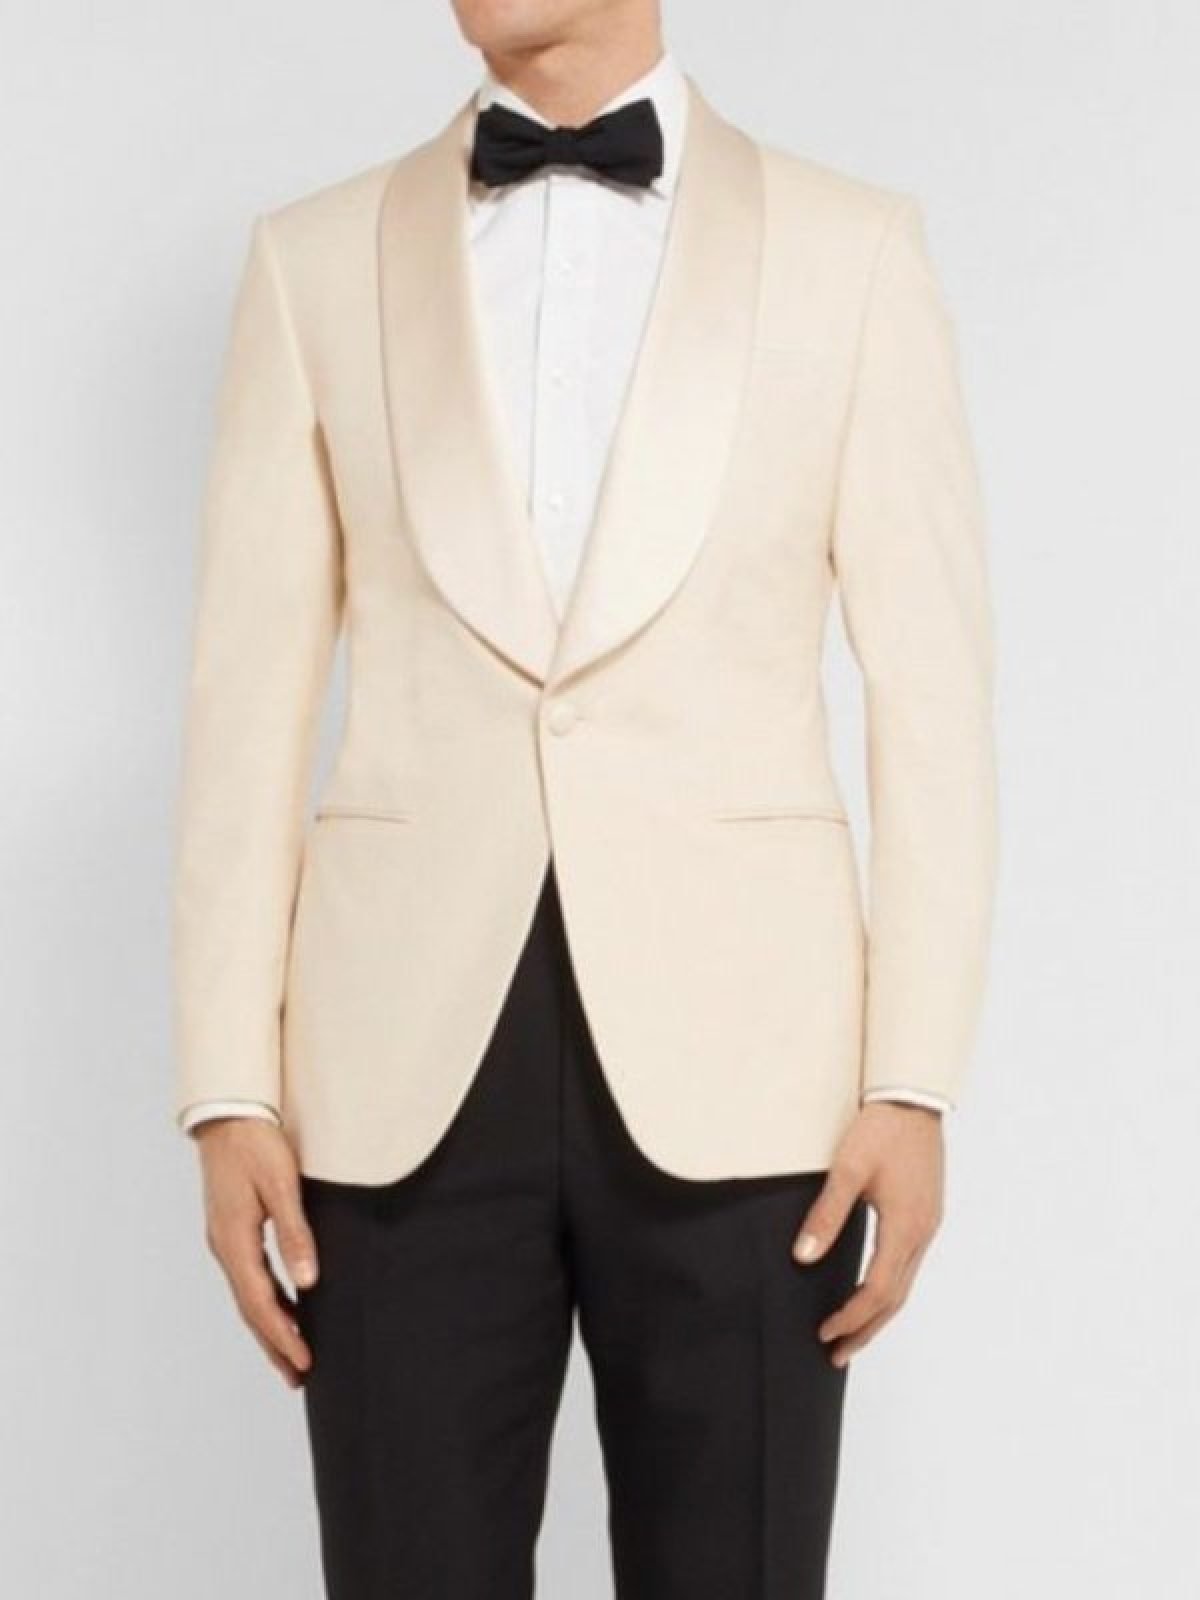 Eggsy Kingsman Ivory Dinner Tuxedo With Free Bow